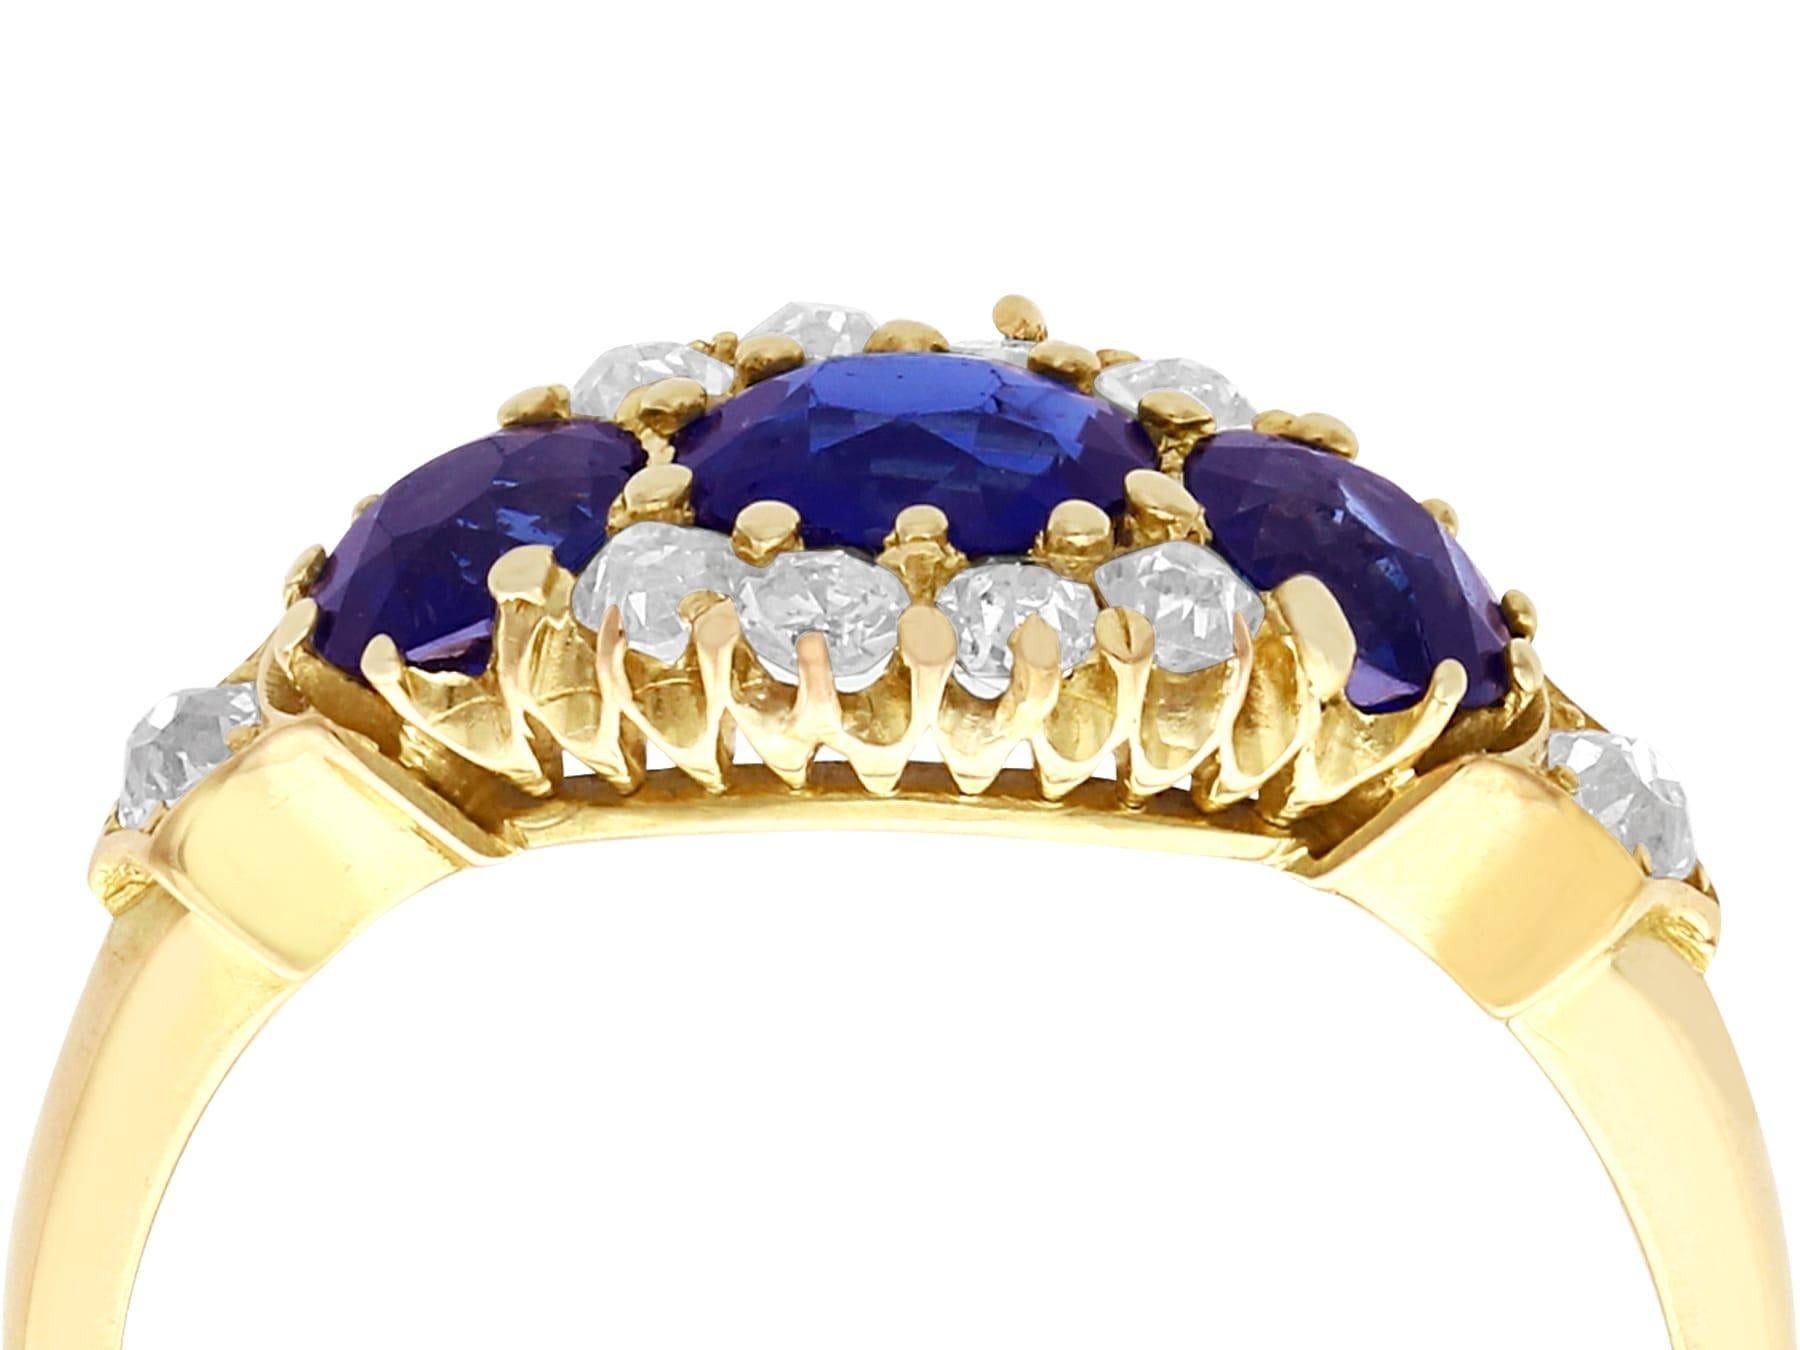 An impressive antique 1.50 carat sapphire and 0.35 carat diamond, 18 karat yellow gold cocktail ring; part of our diverse antique jewelry and estate jewelry collections.

This fine and impressive antique sapphire and diamond ring has been crafted in